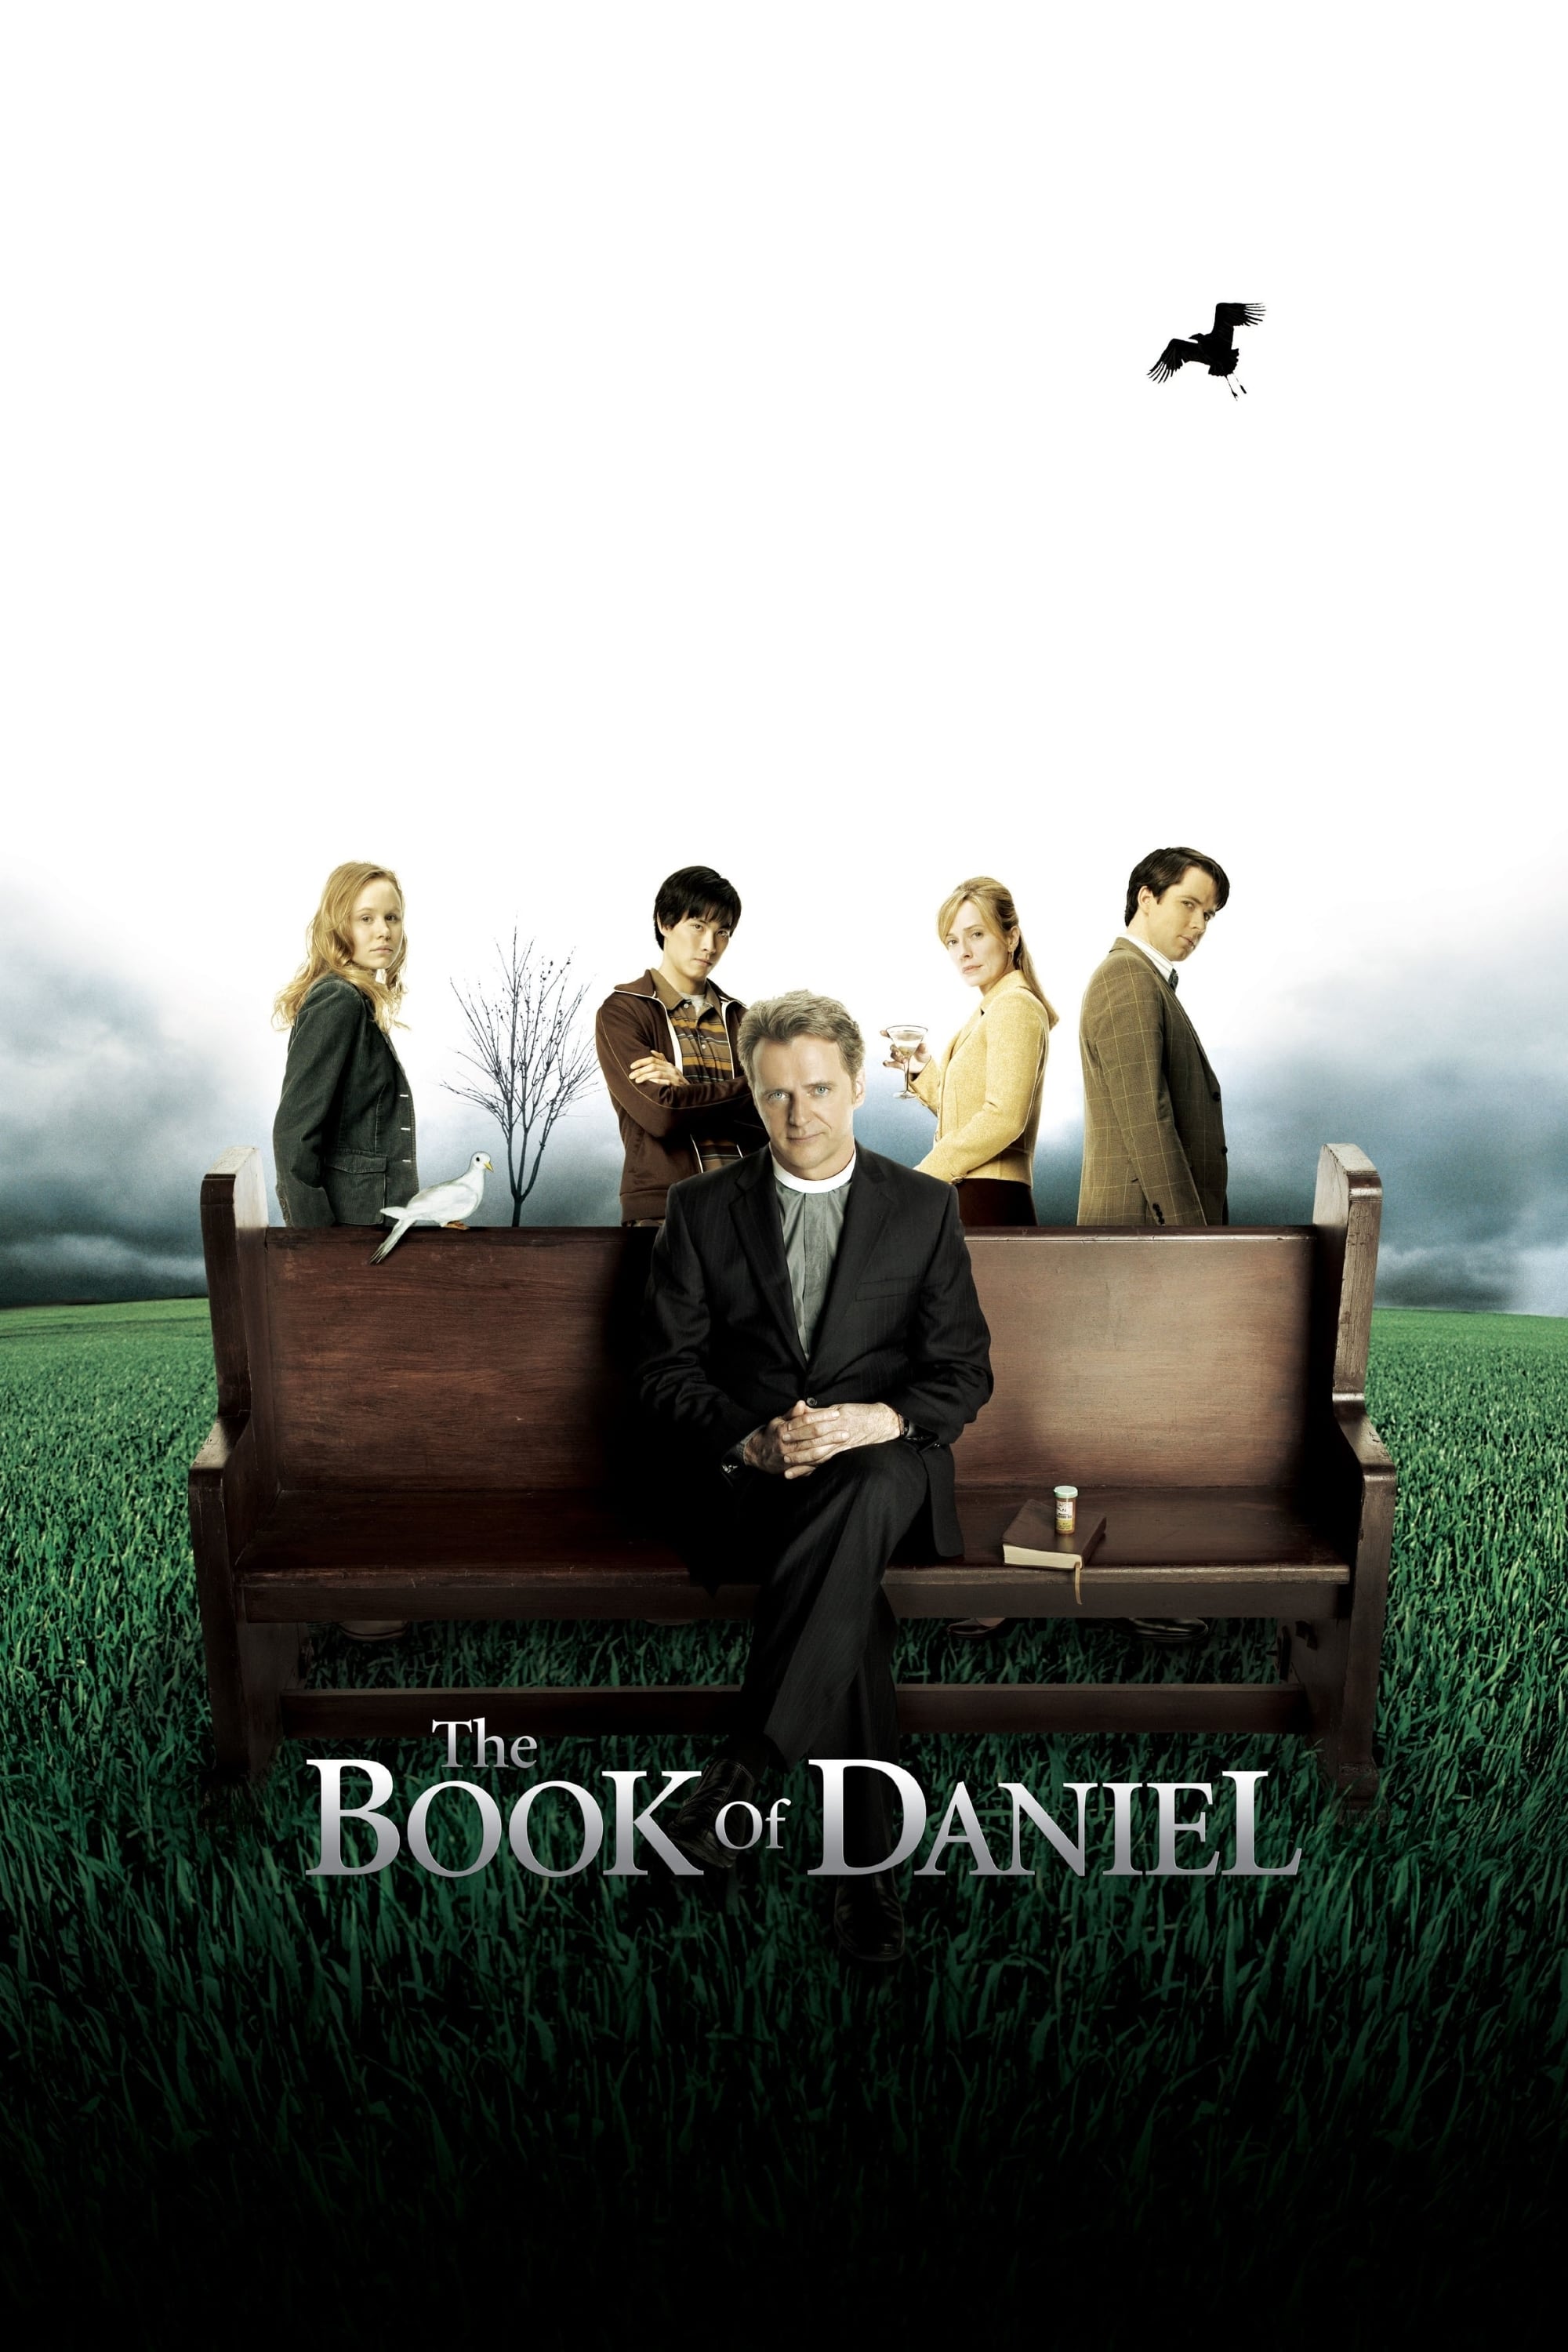 The Book of Daniel TV Shows About Imaginary Friend